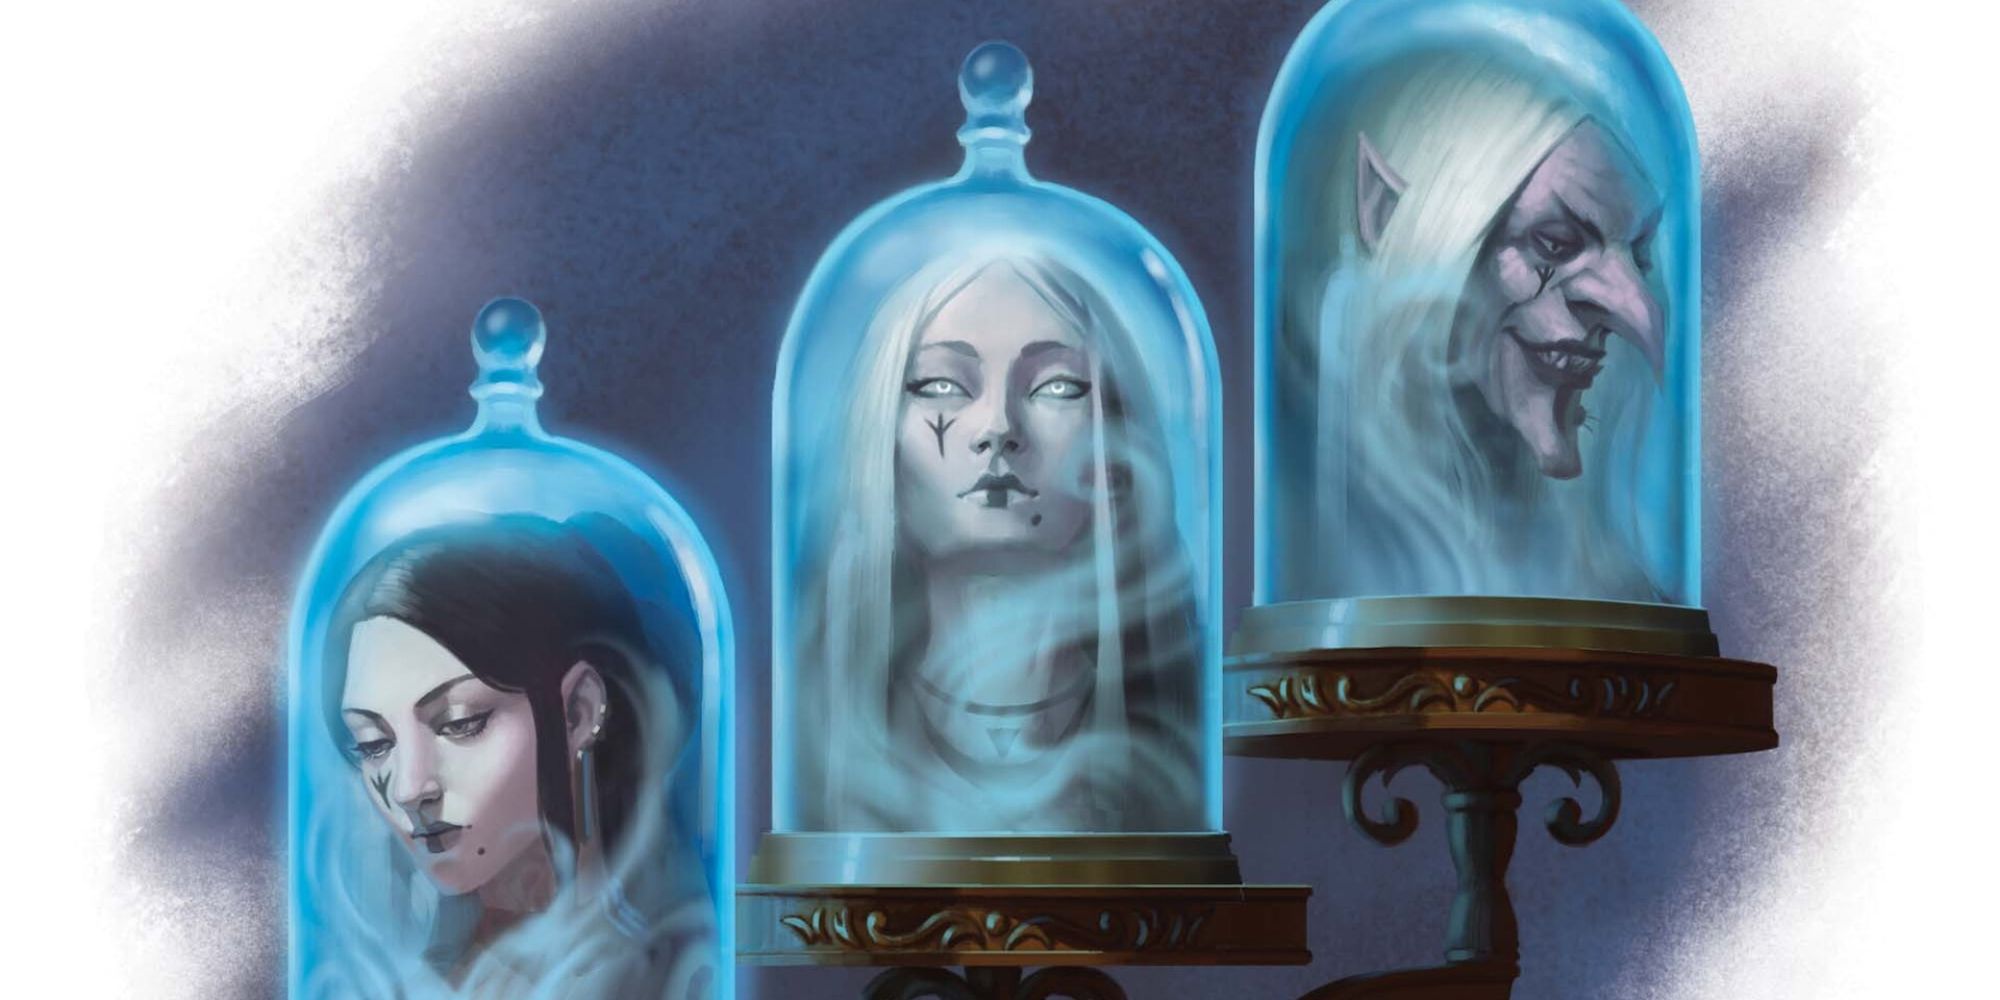 The Jars Of Time with three heads of the same person at different ages in D&D Artwork